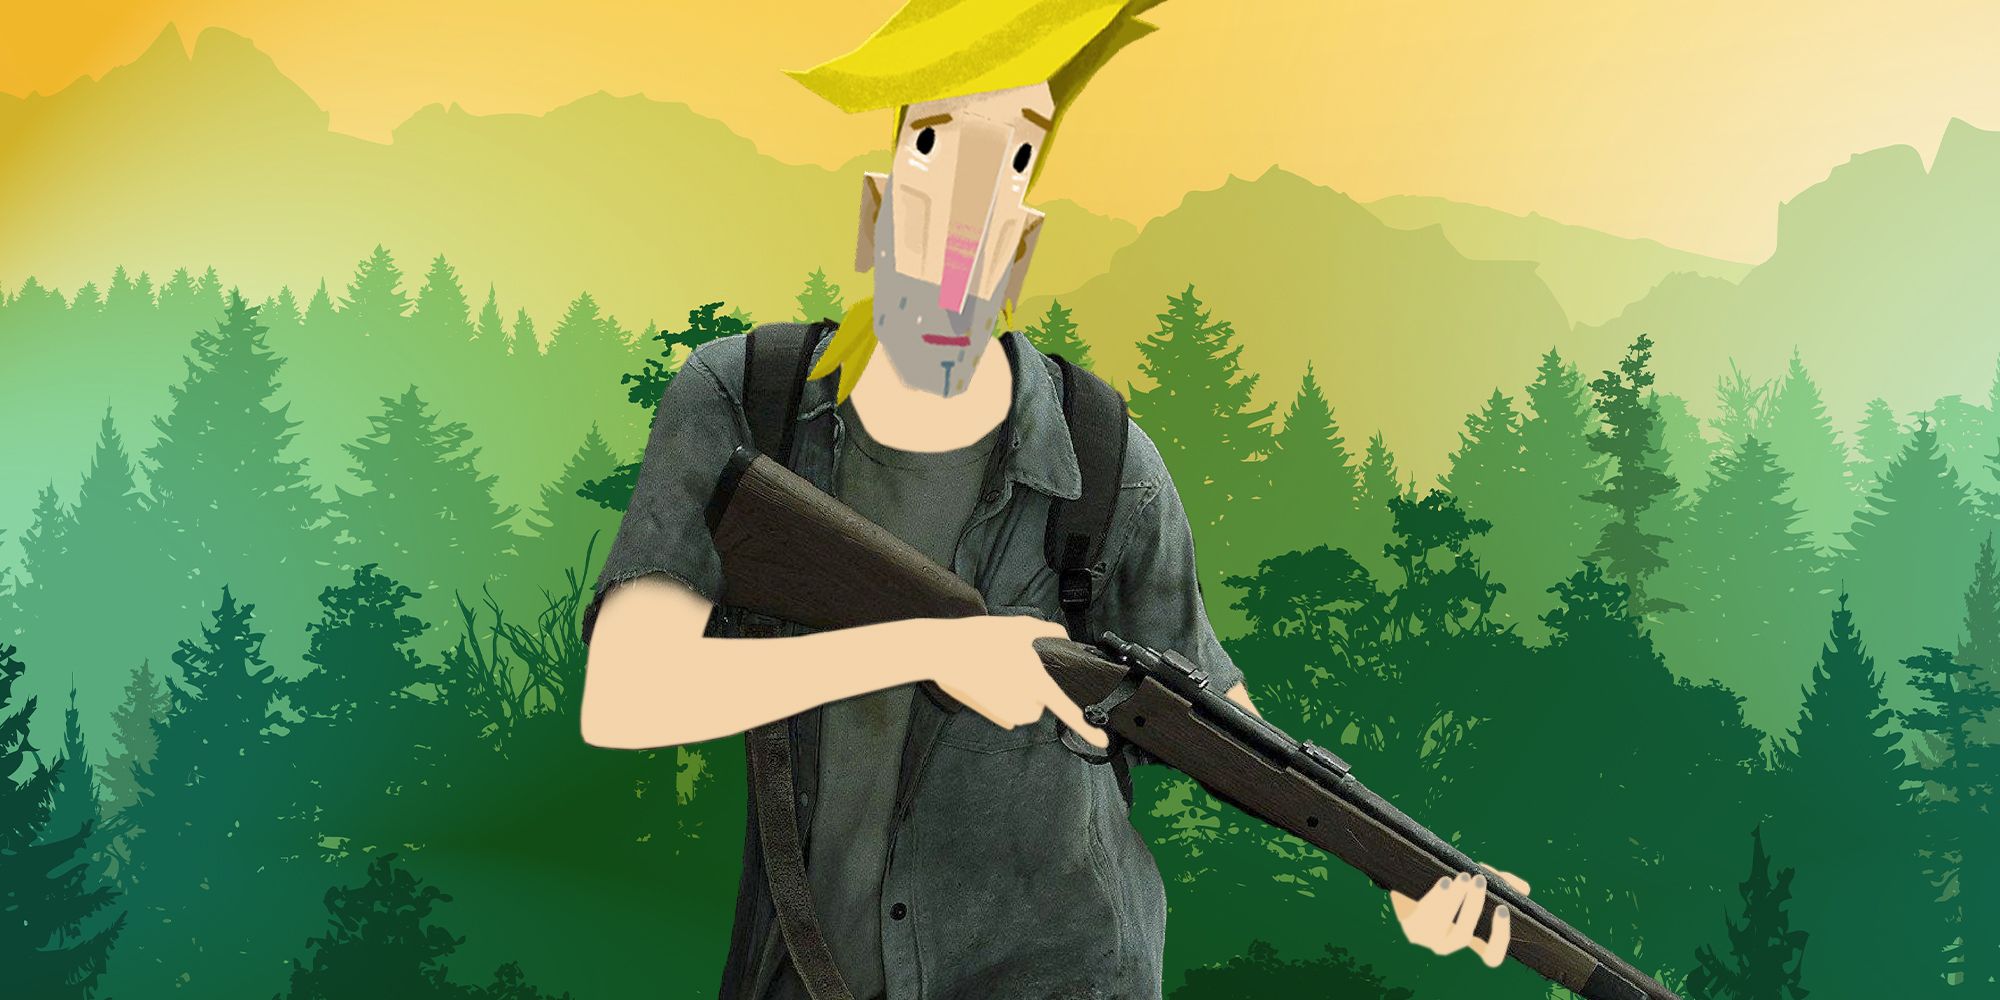 Ellie, from The Last of Us Part 2, with Guybrush Threepwood's head and arms. She's holding a rifle. The silhouettes of forest trees and mountains loom in the backround.